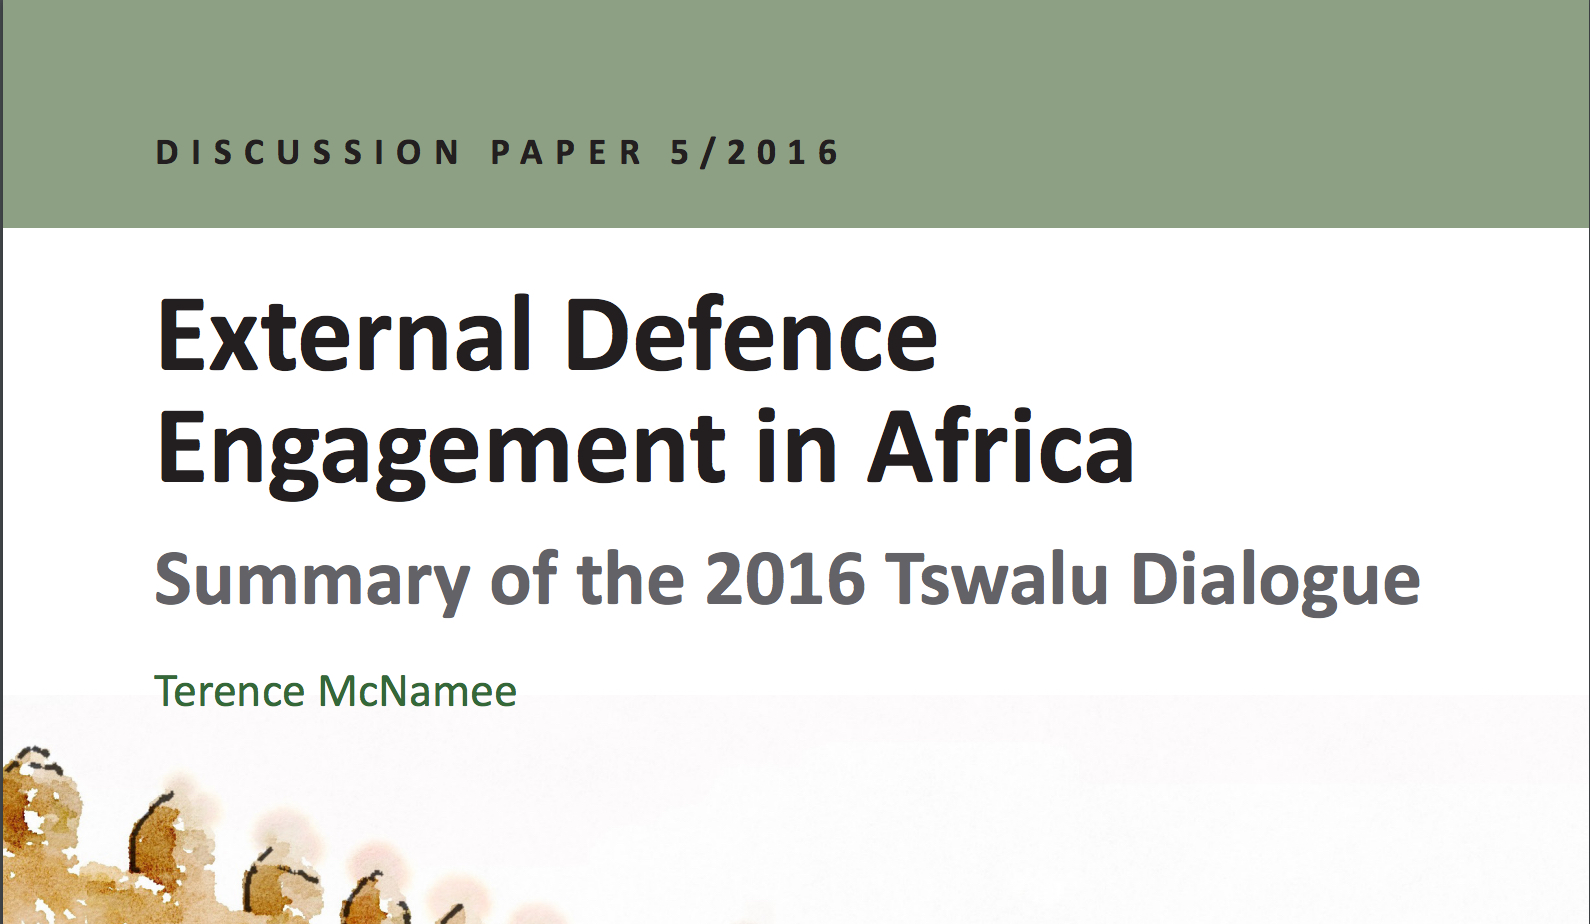 External Defence Engagement in Africa - Summary of the 2016 Tswalu Dialogue